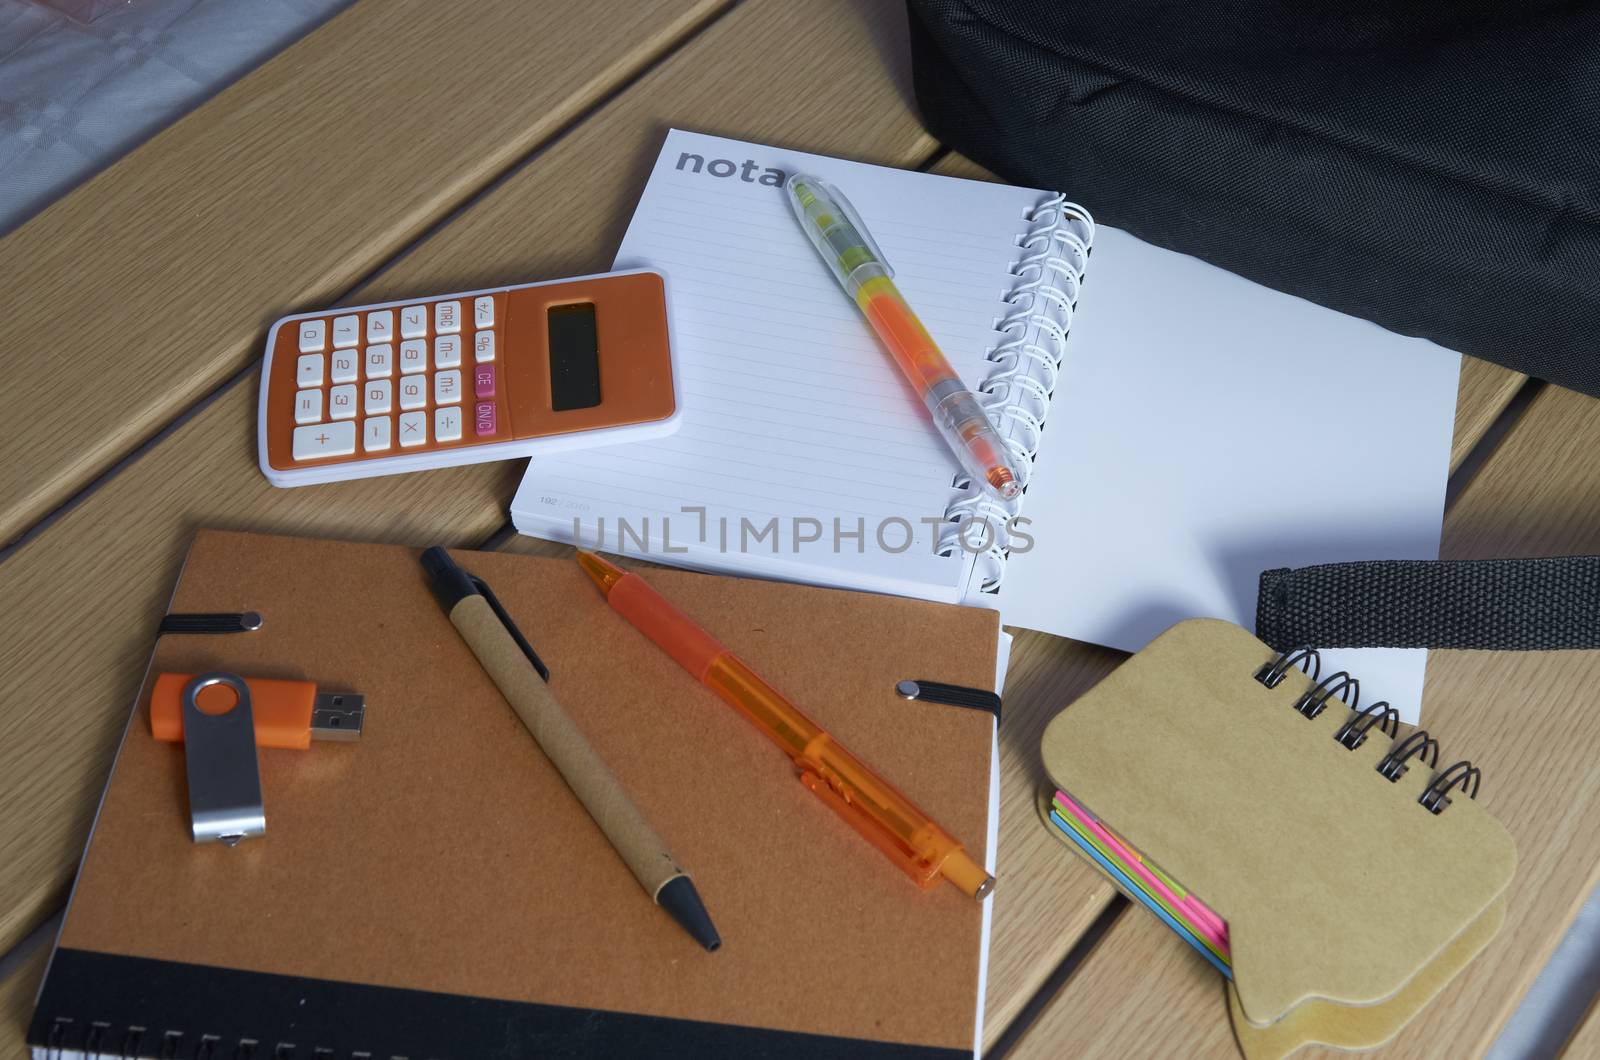 Back to school, notebooks, pens and markers by bpardofotografia